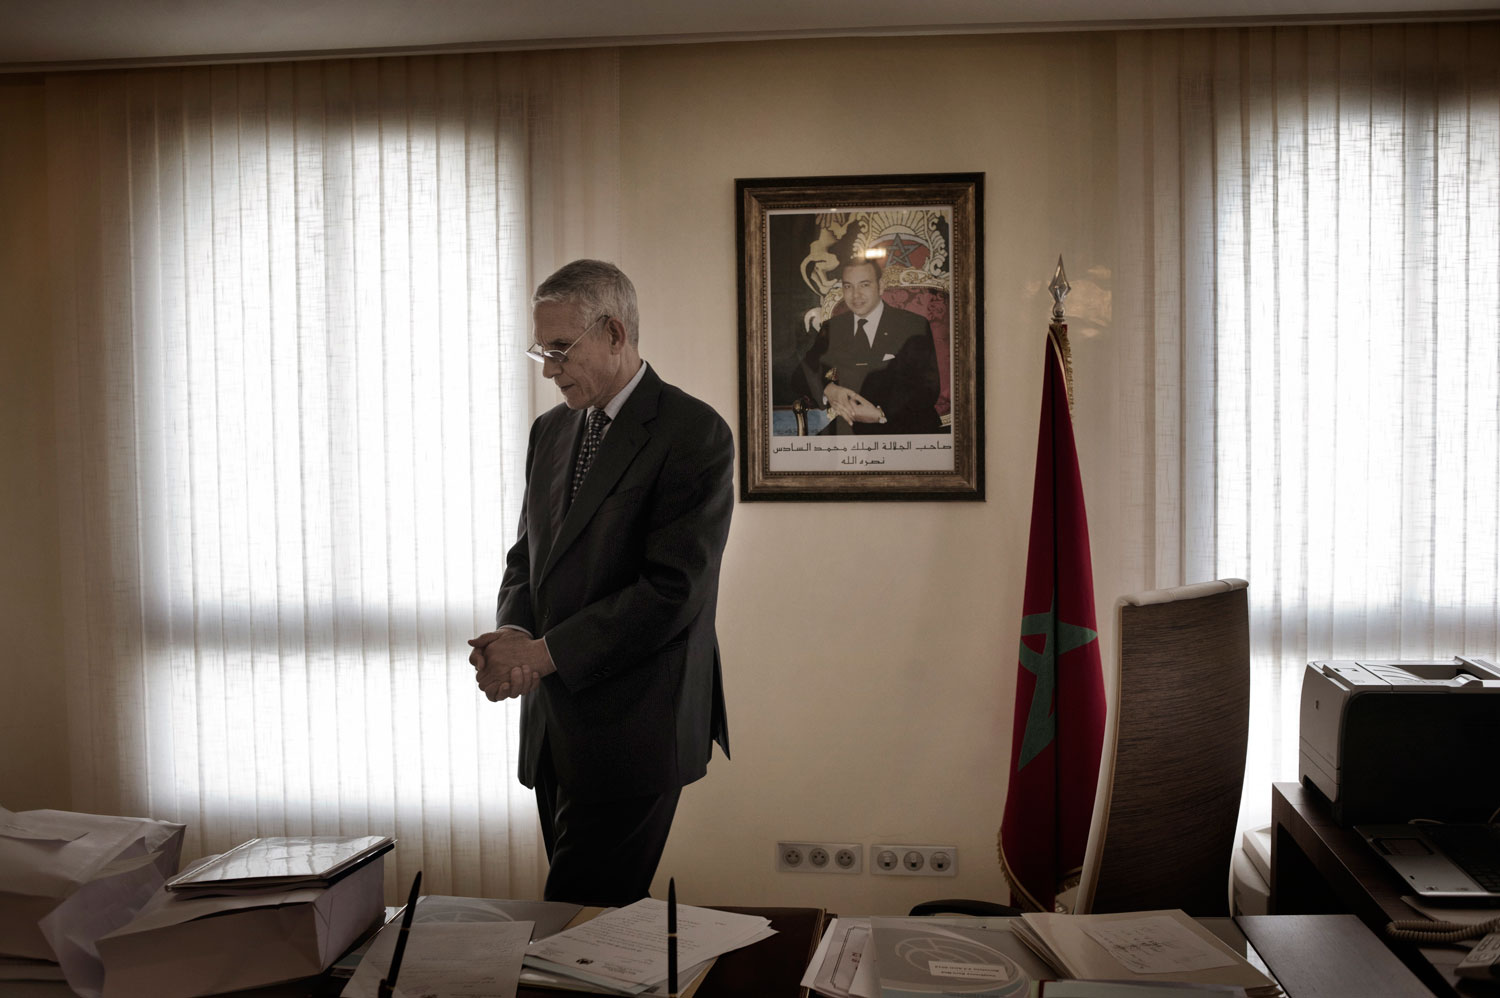 March 2012. Lahen Daoudi, Morocco’s Minister of Higher Education and senior PJD leader, pictured in Rabat, Morocco, says his country needs more technology and scientific skills, not more Islamic studies.